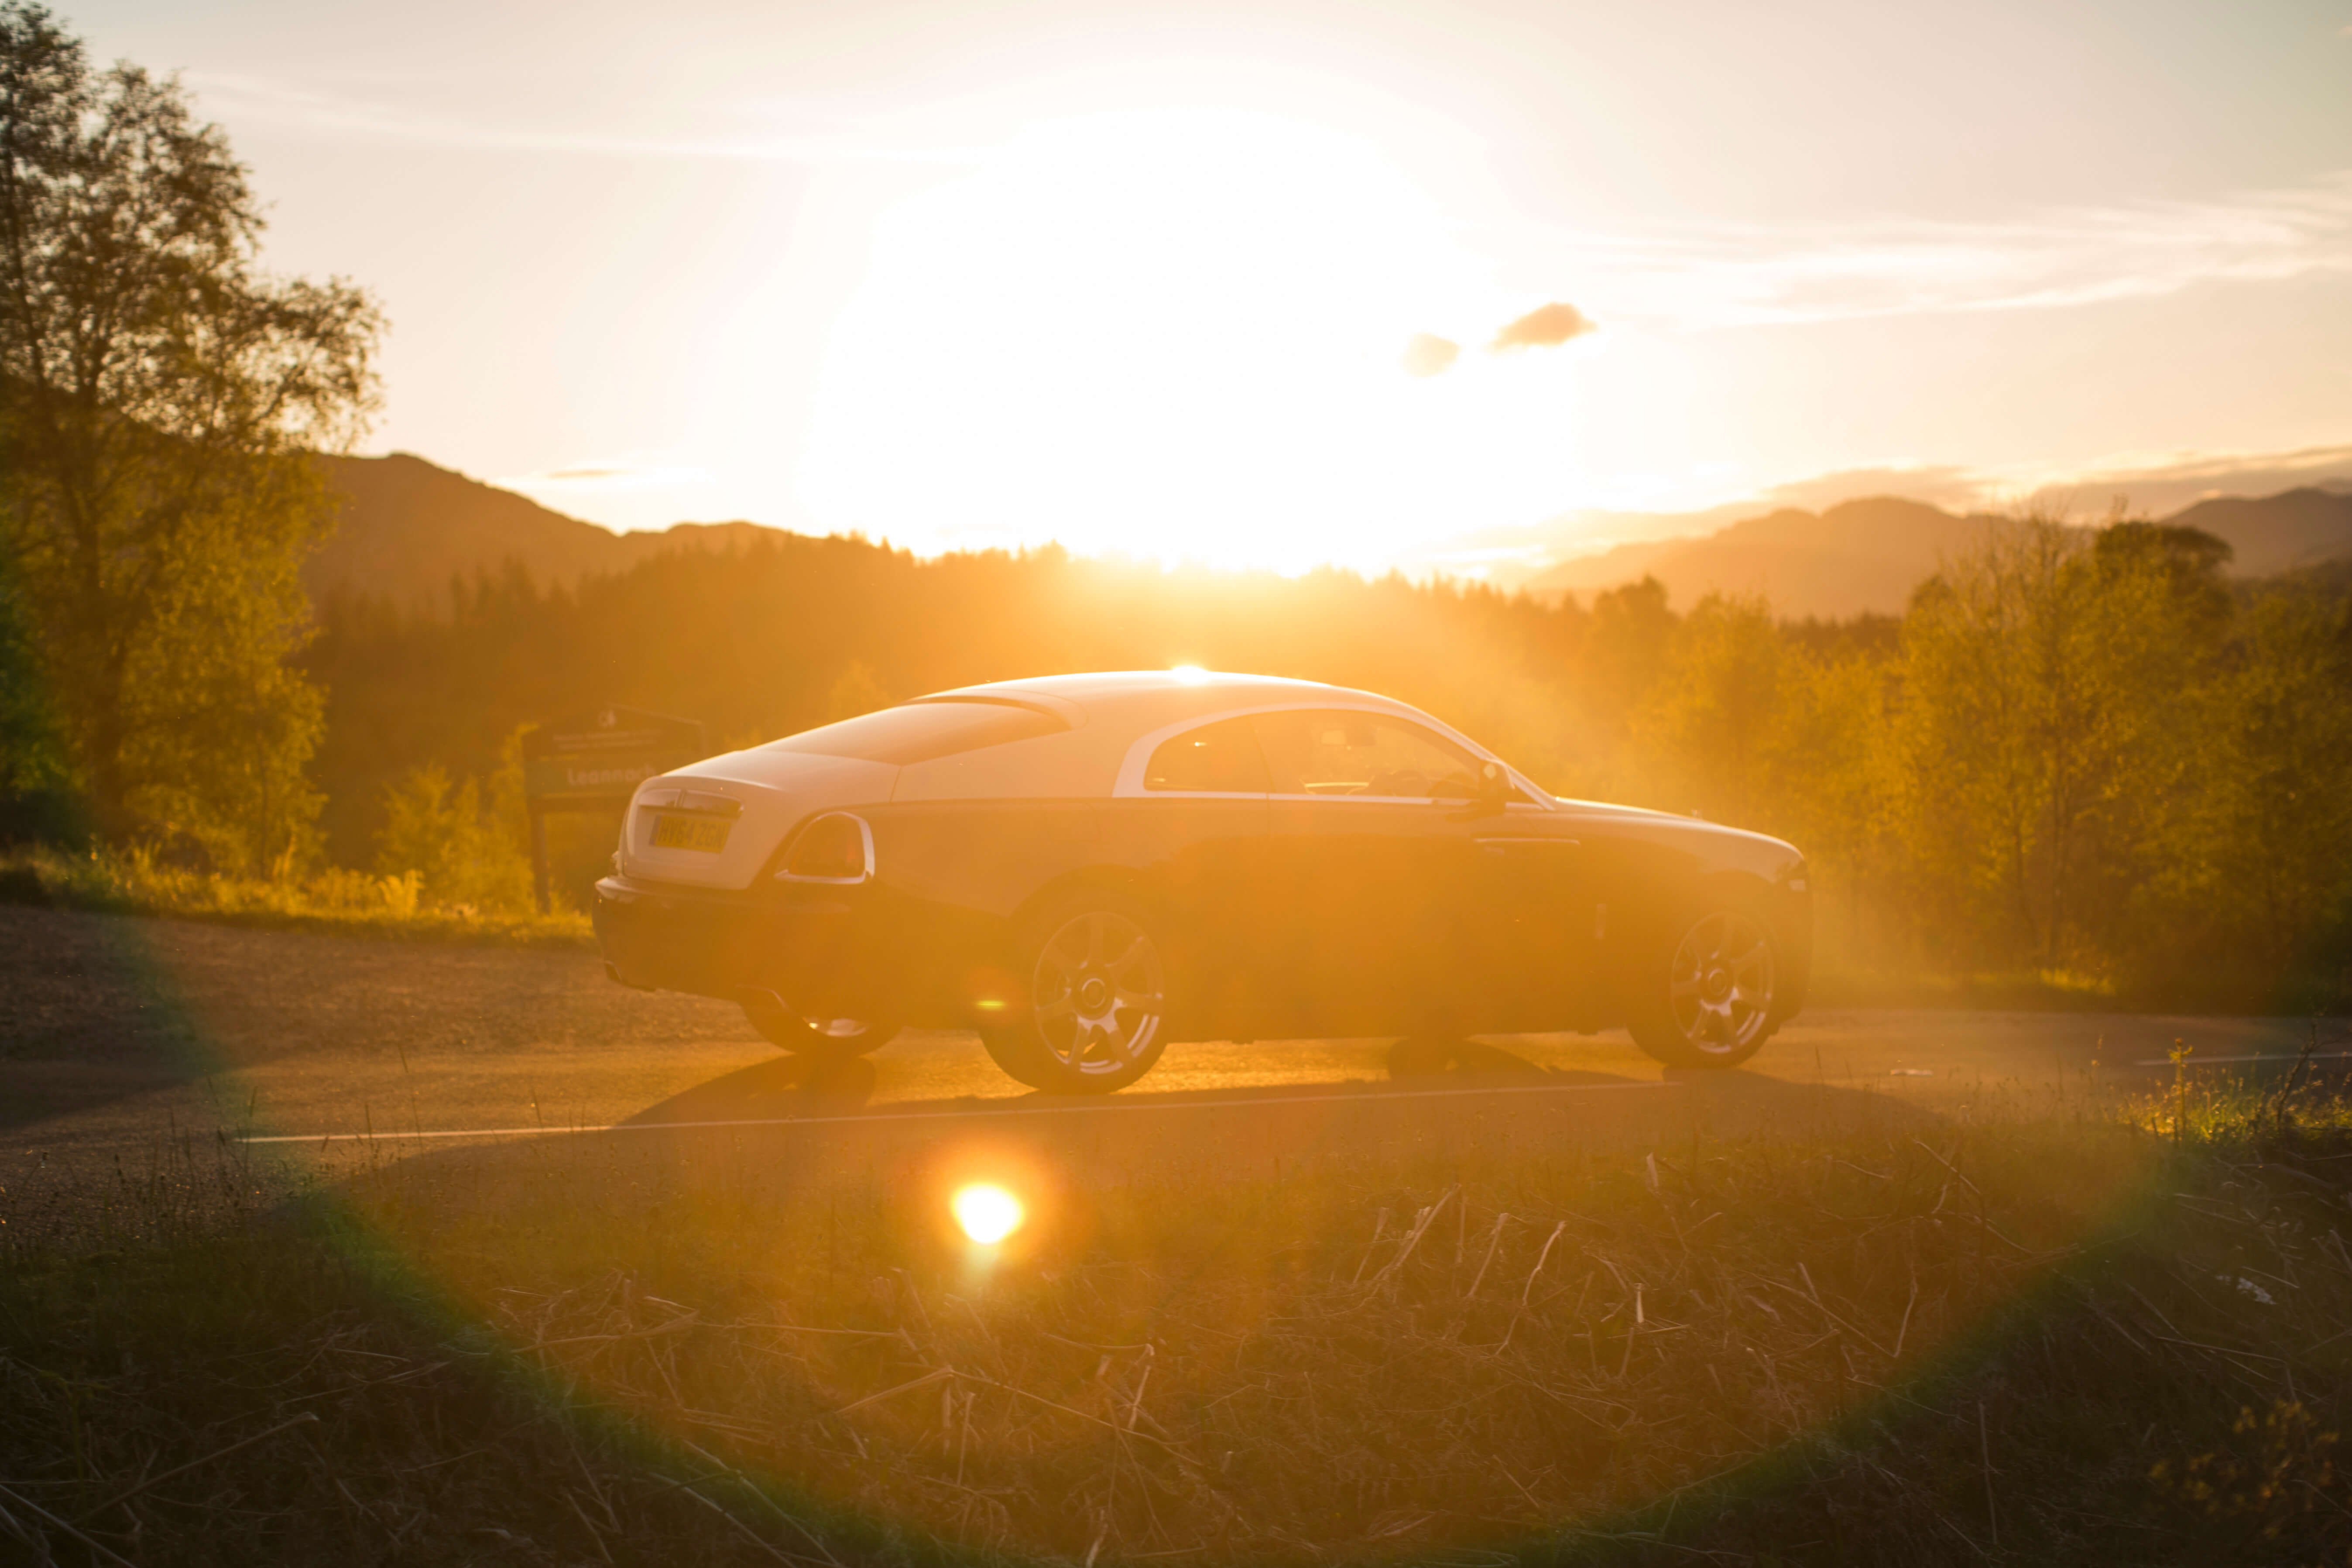 LUX car review: Rolls-Royce Wraith